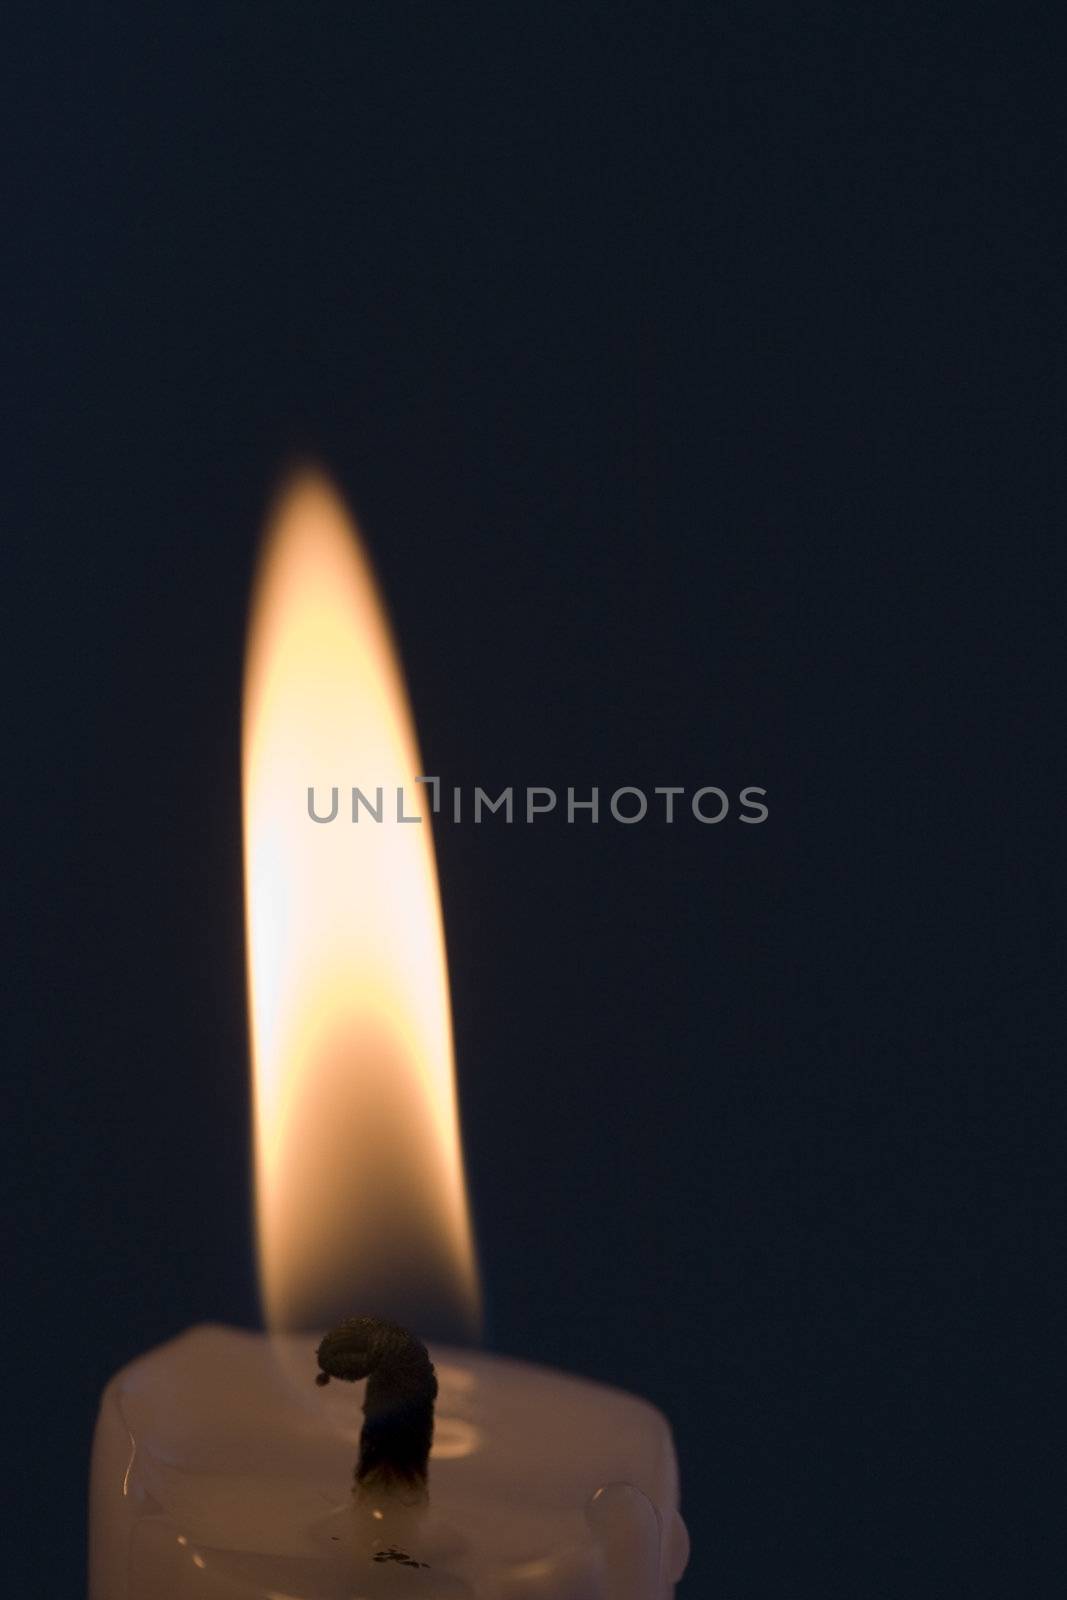 A single candle flame with a black background
